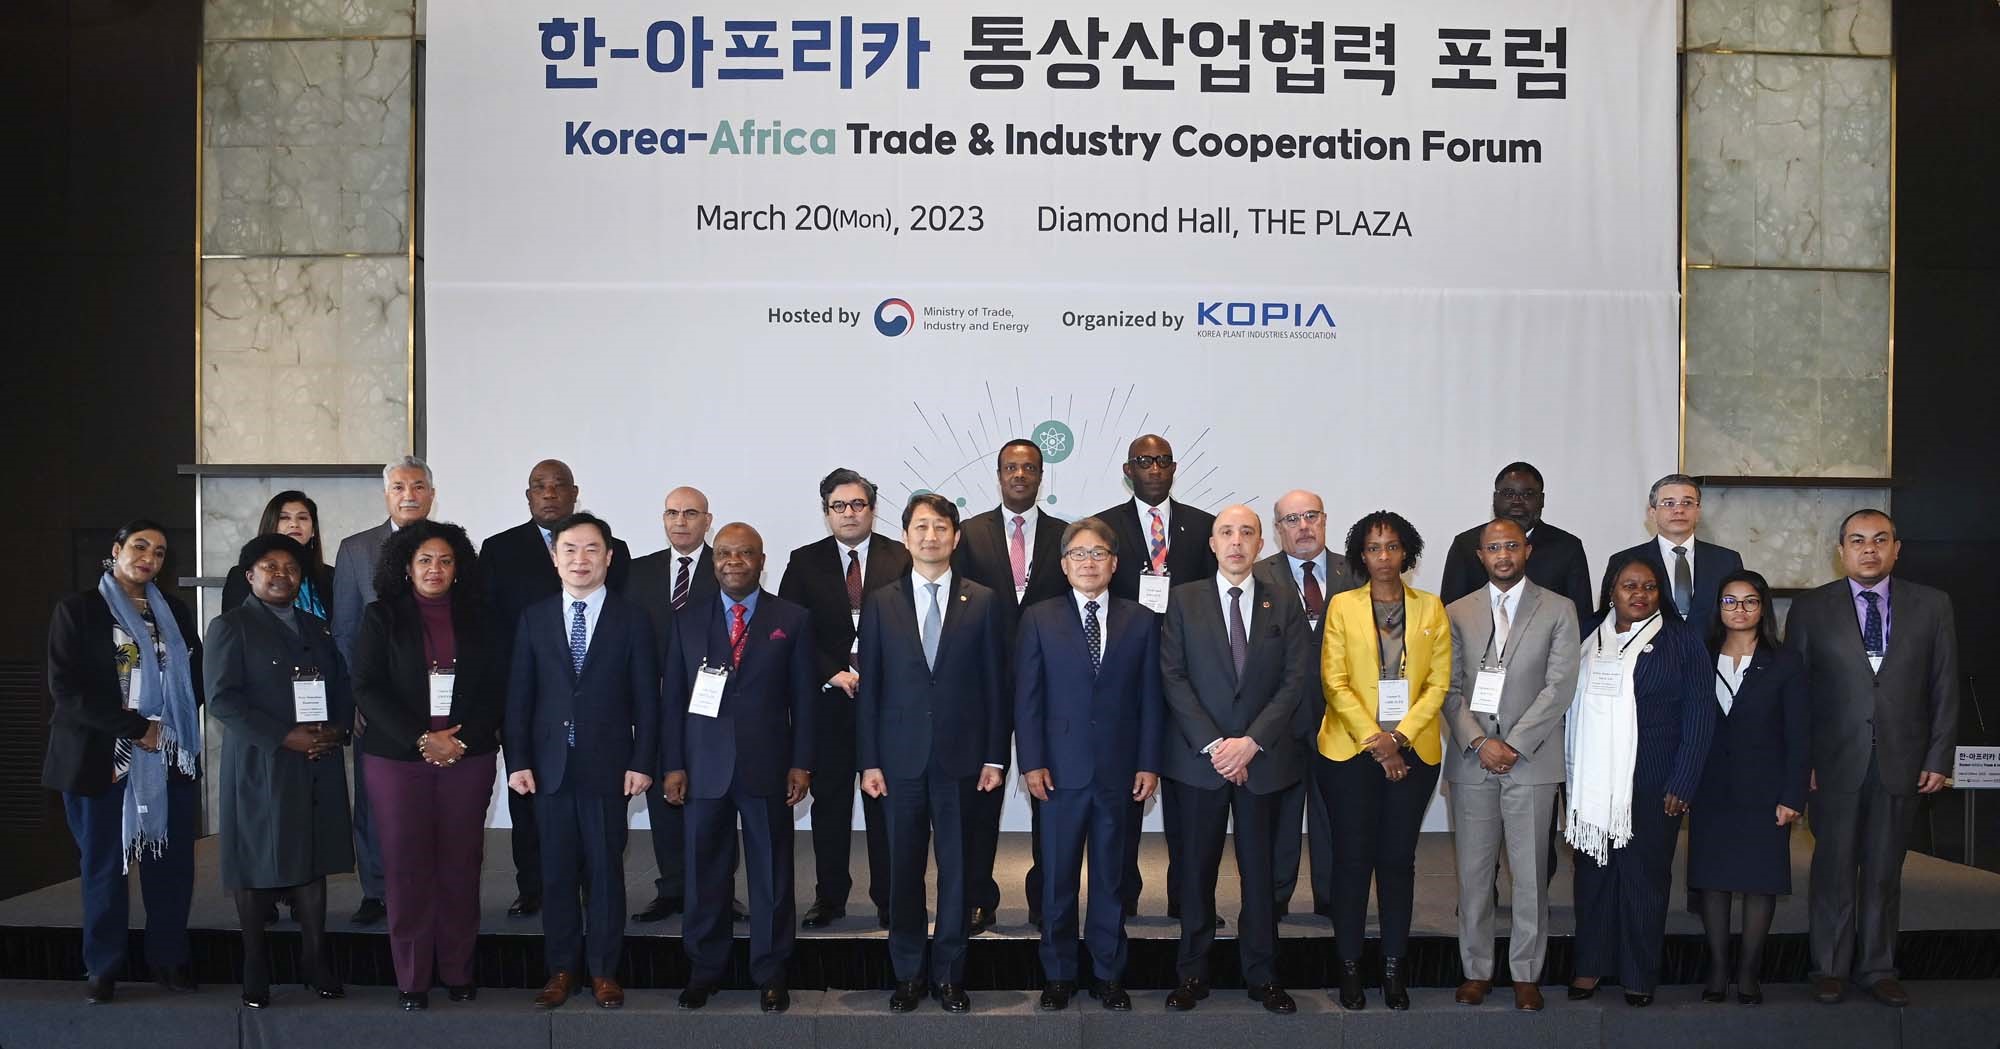 Trade Minister attends Korea-Africa Trade & Industry Cooperation Forum 2023 Image 0